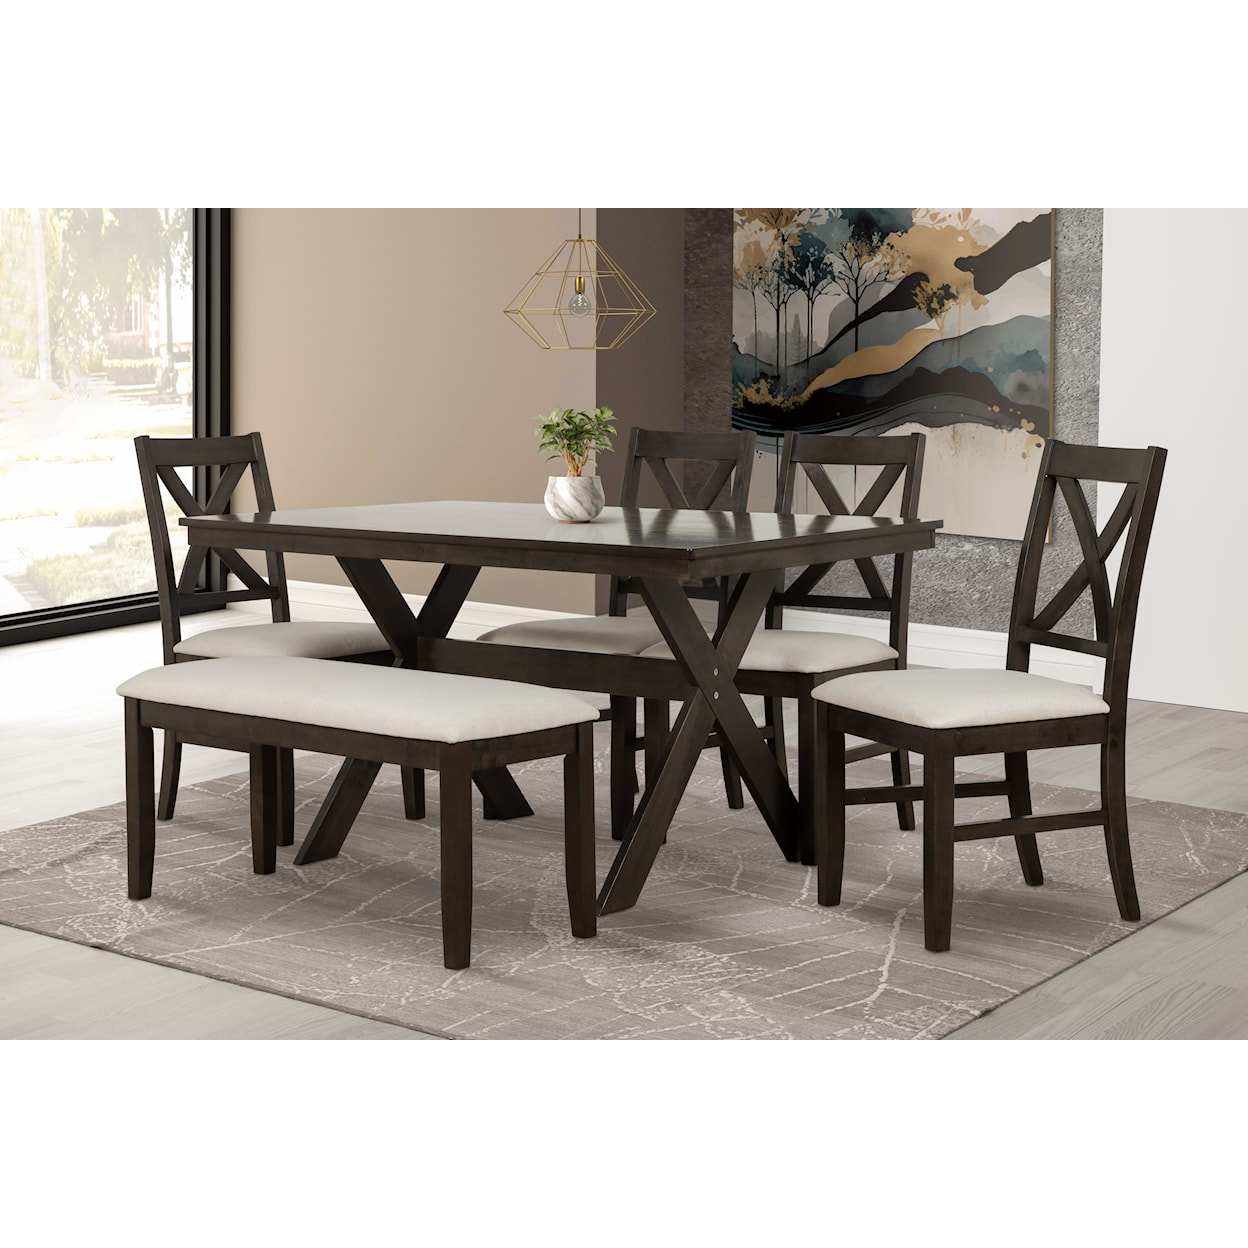 New Classic Meadows Charcoal Dining Table